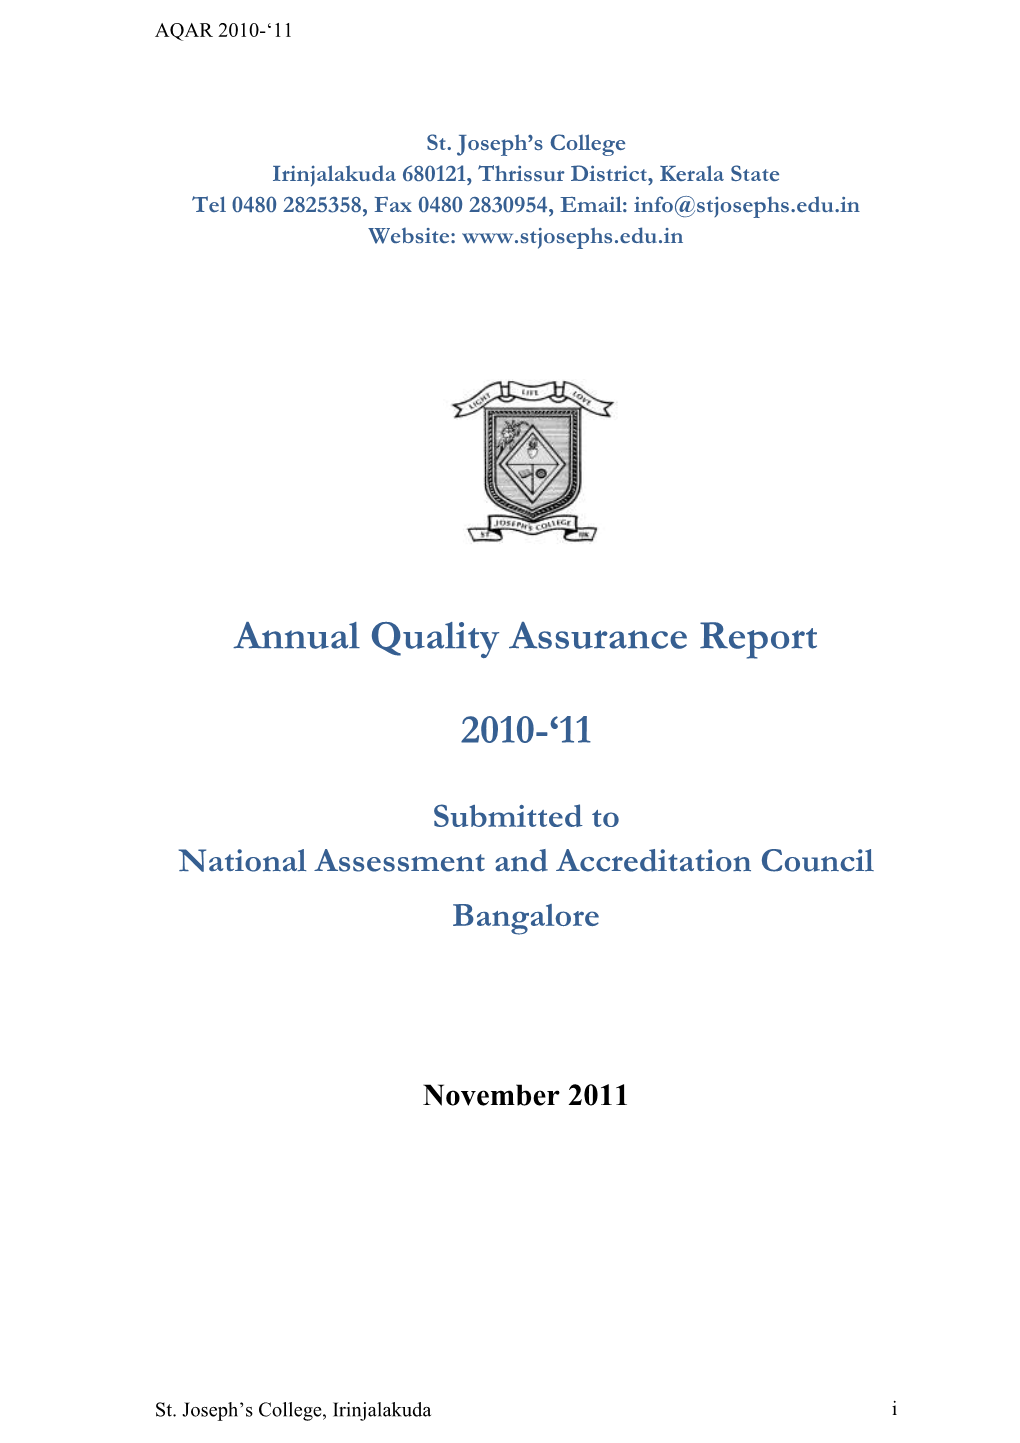 Annual Quality Assurance Report 2010-'11